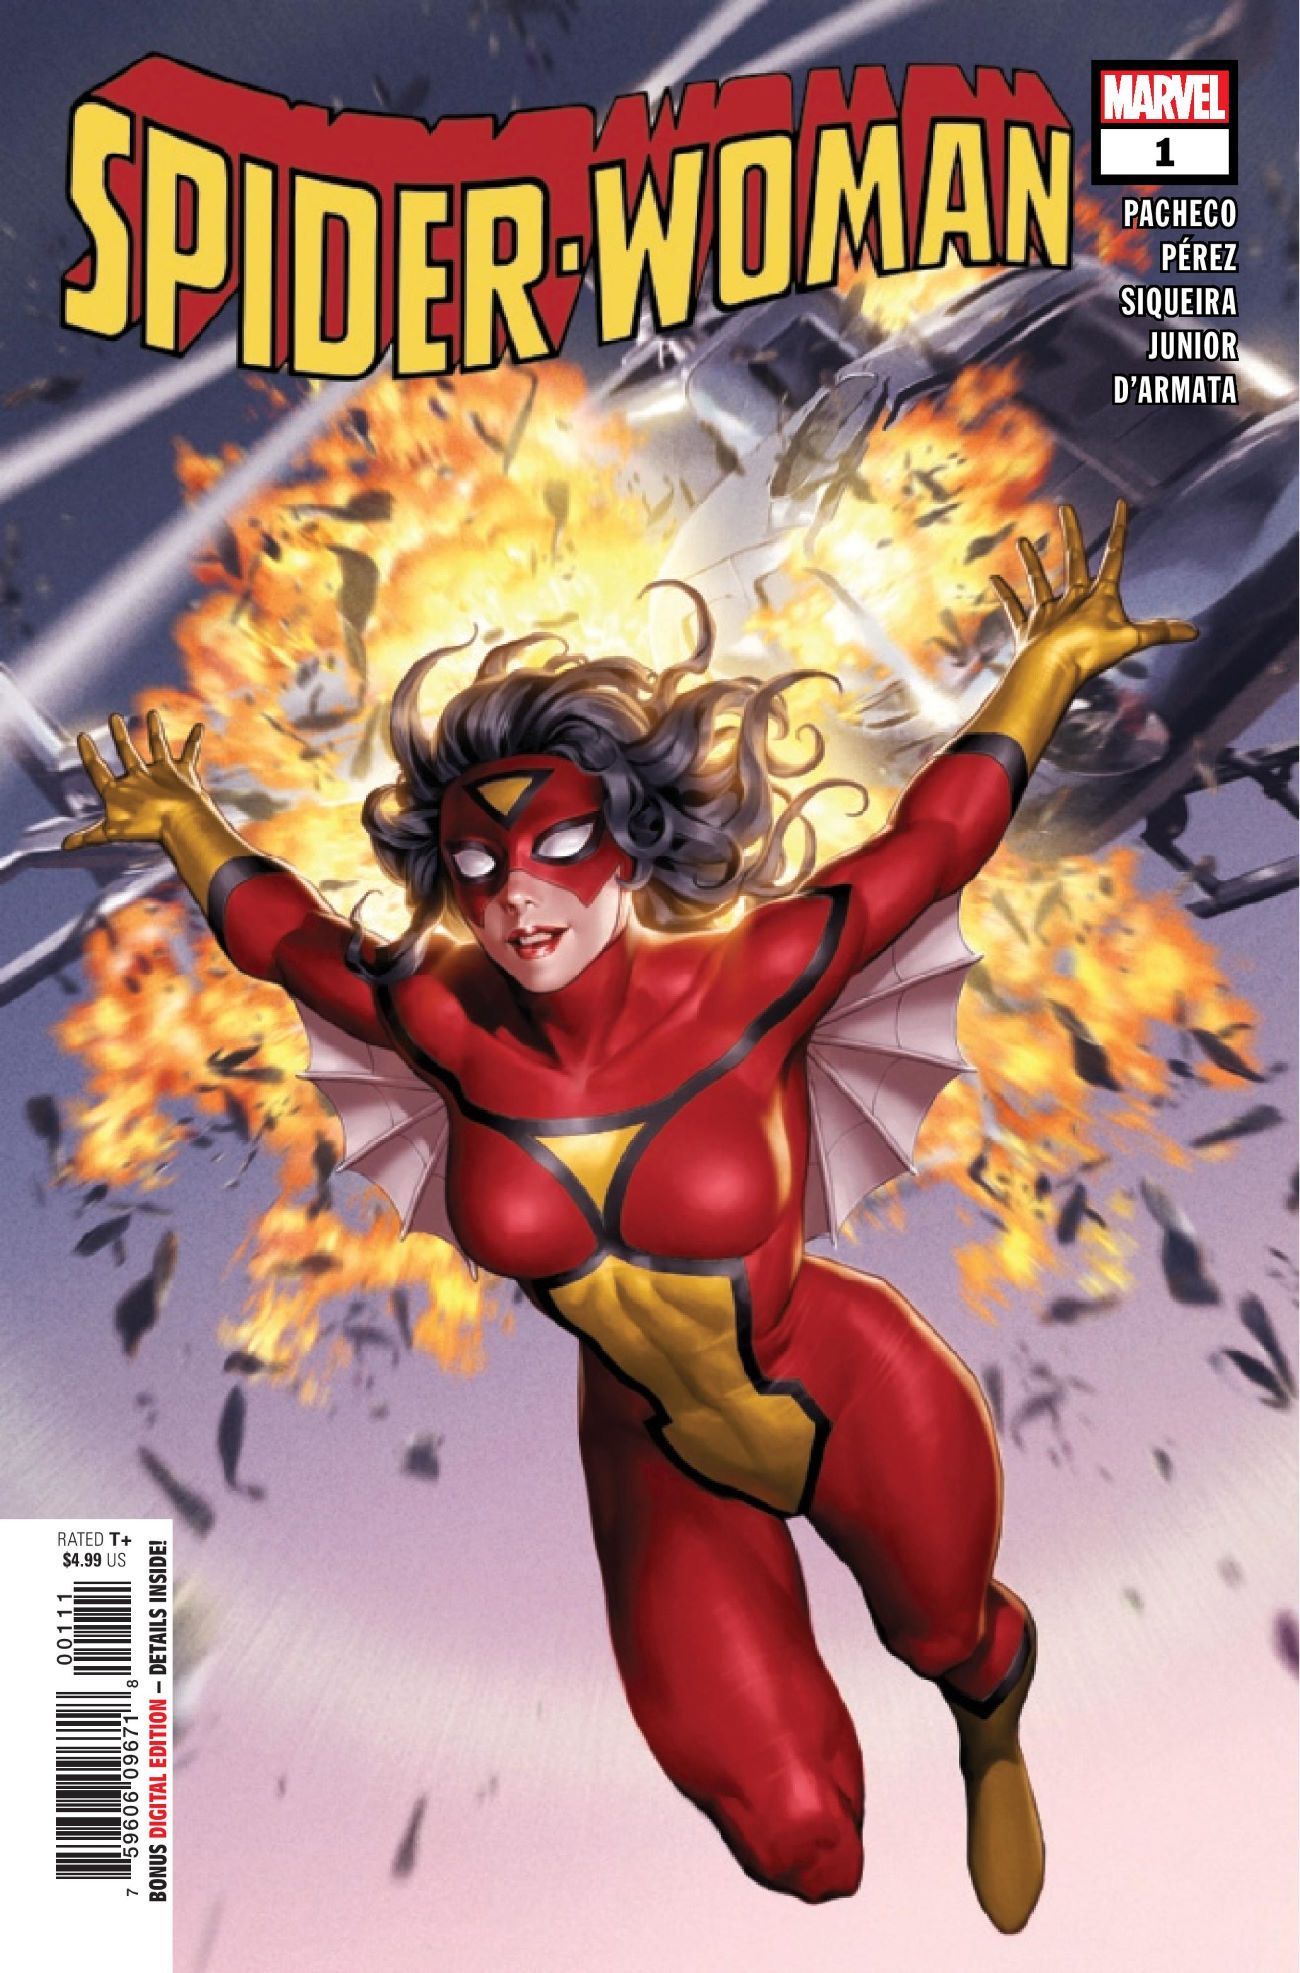 Spider-Woman #1 Preview: Adventures in Babysitting?